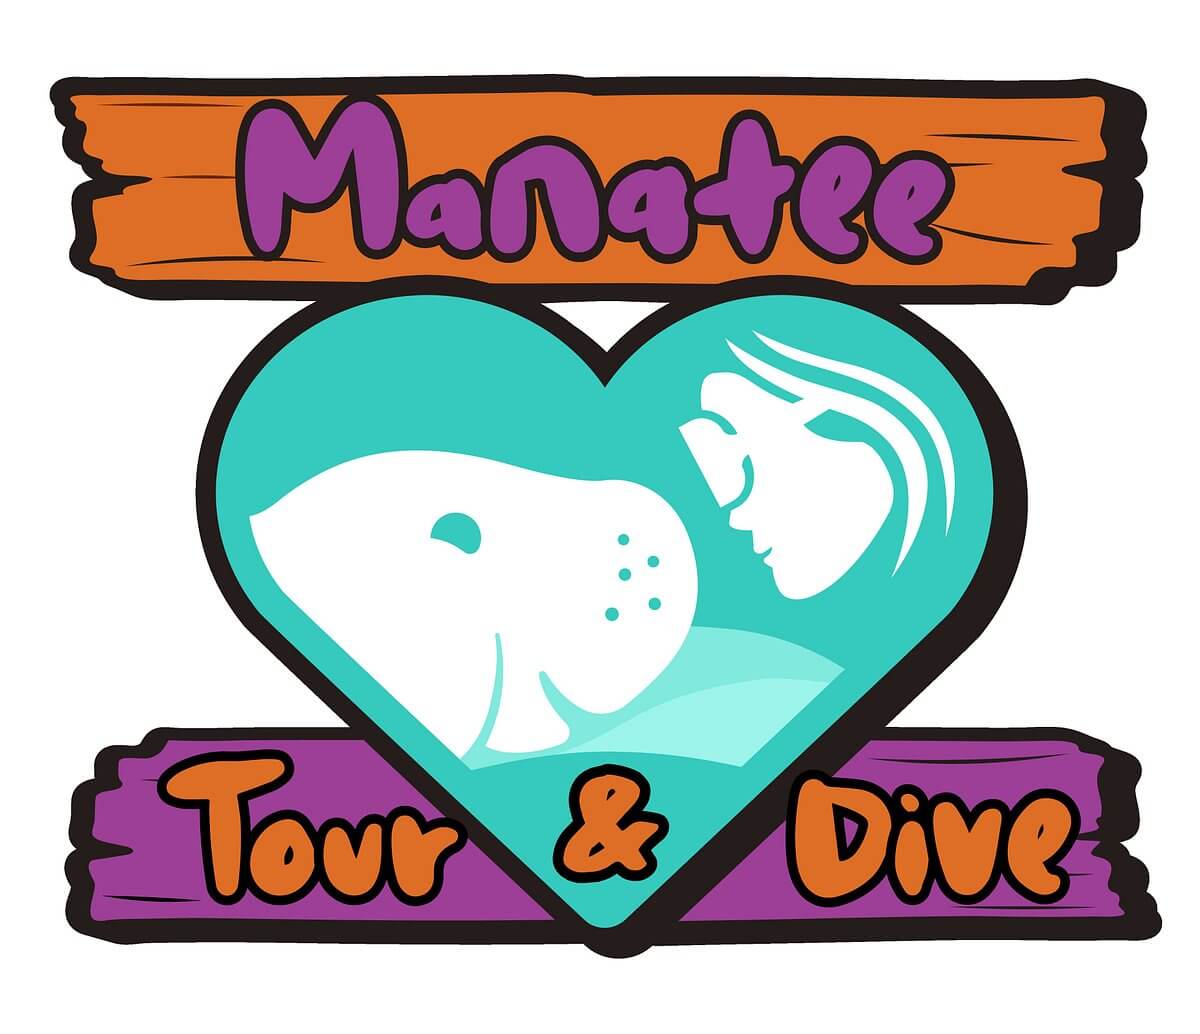 Manatee Tour and Dive